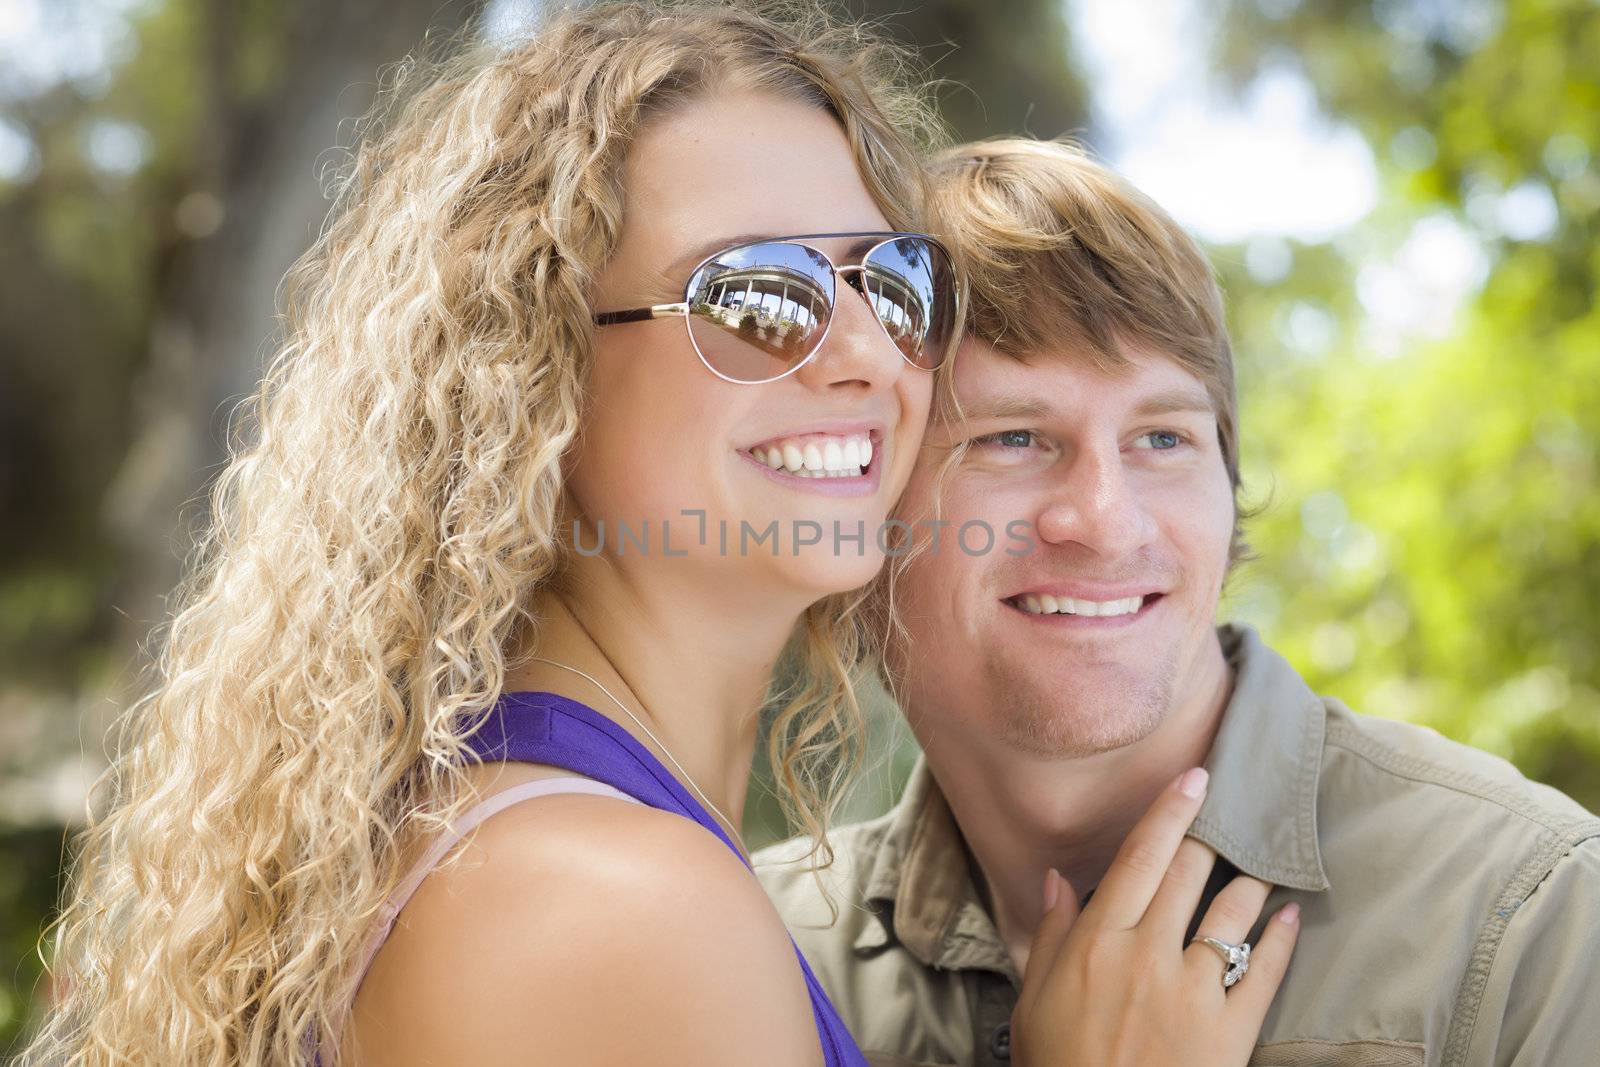 Attractive Loving Couple Portrait in the Park by Feverpitched